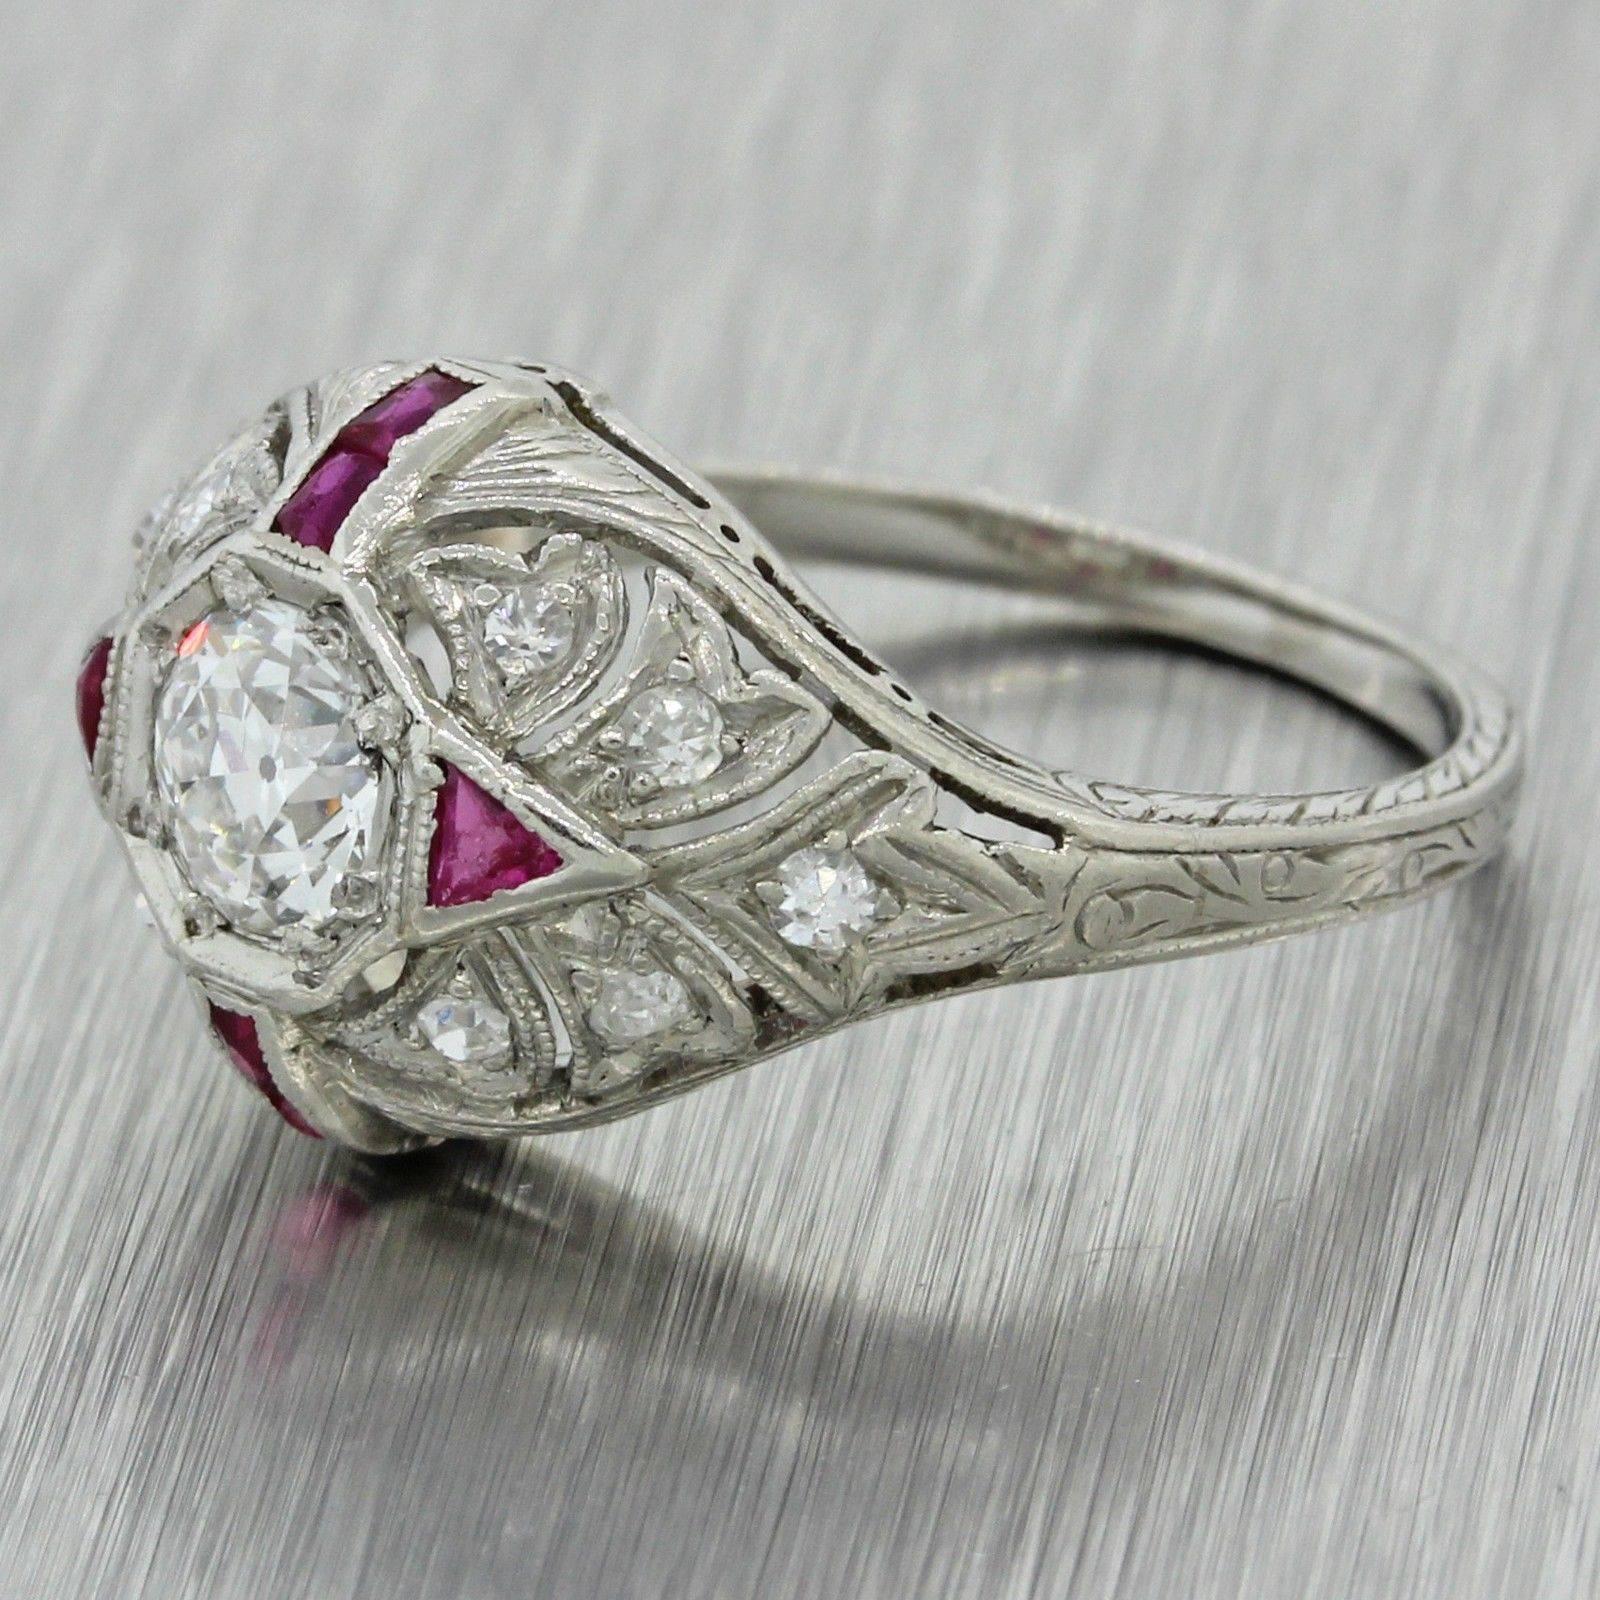 This is a 1920s Antique Art Deco Platinum .59ctw Old Cut Diamond Ruby Engagement Ring EGL. This ring suggested retail price is $6,330 USD. It will come in a lovely ring box for a perfect presentation and our unconditional 30 day money back return